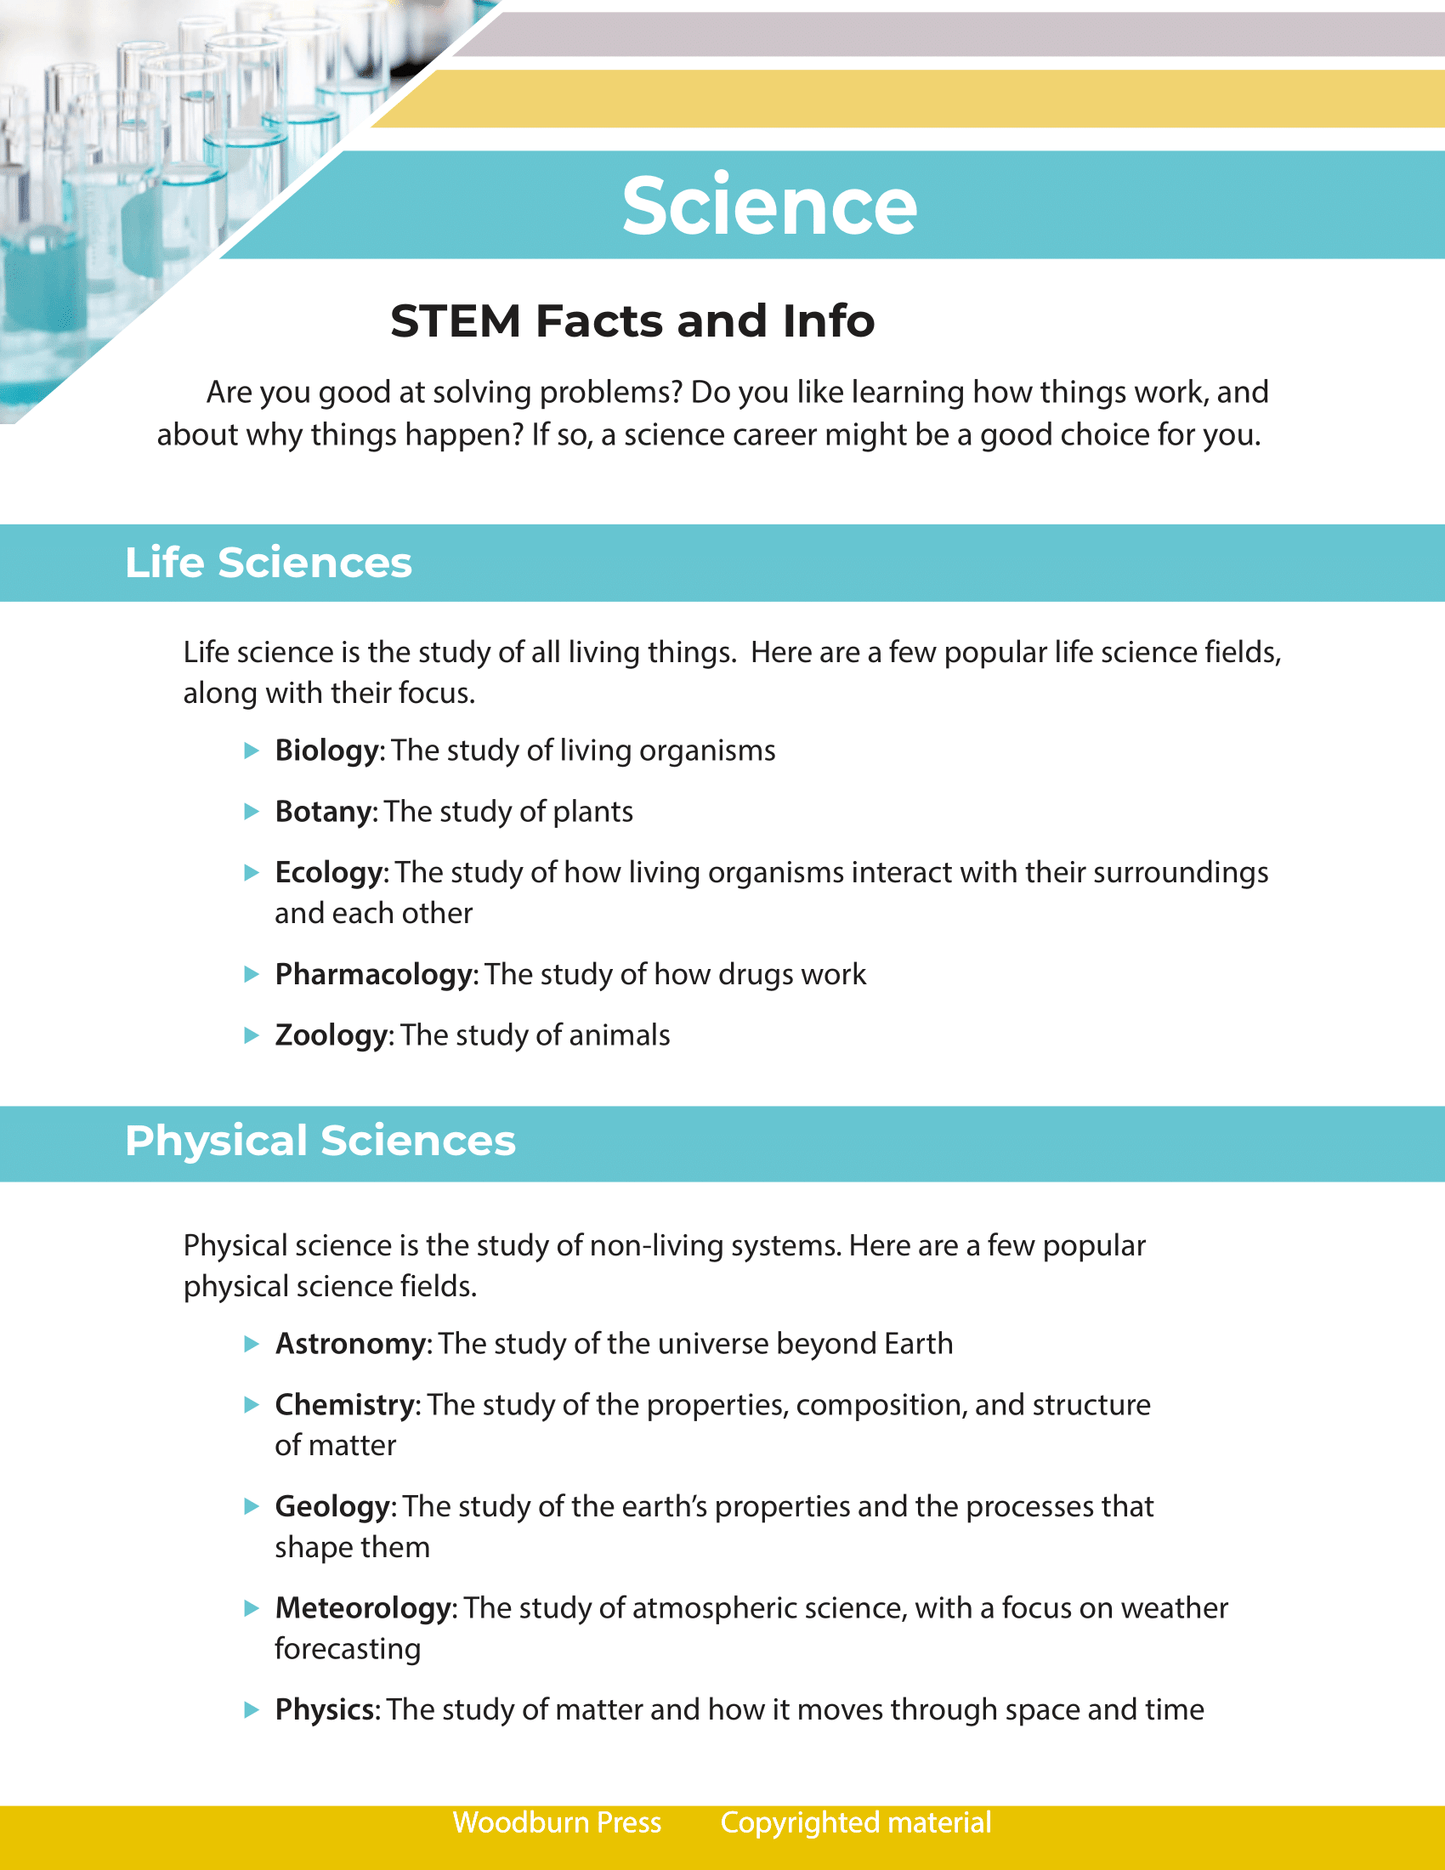 STEM Facts and Info - Science